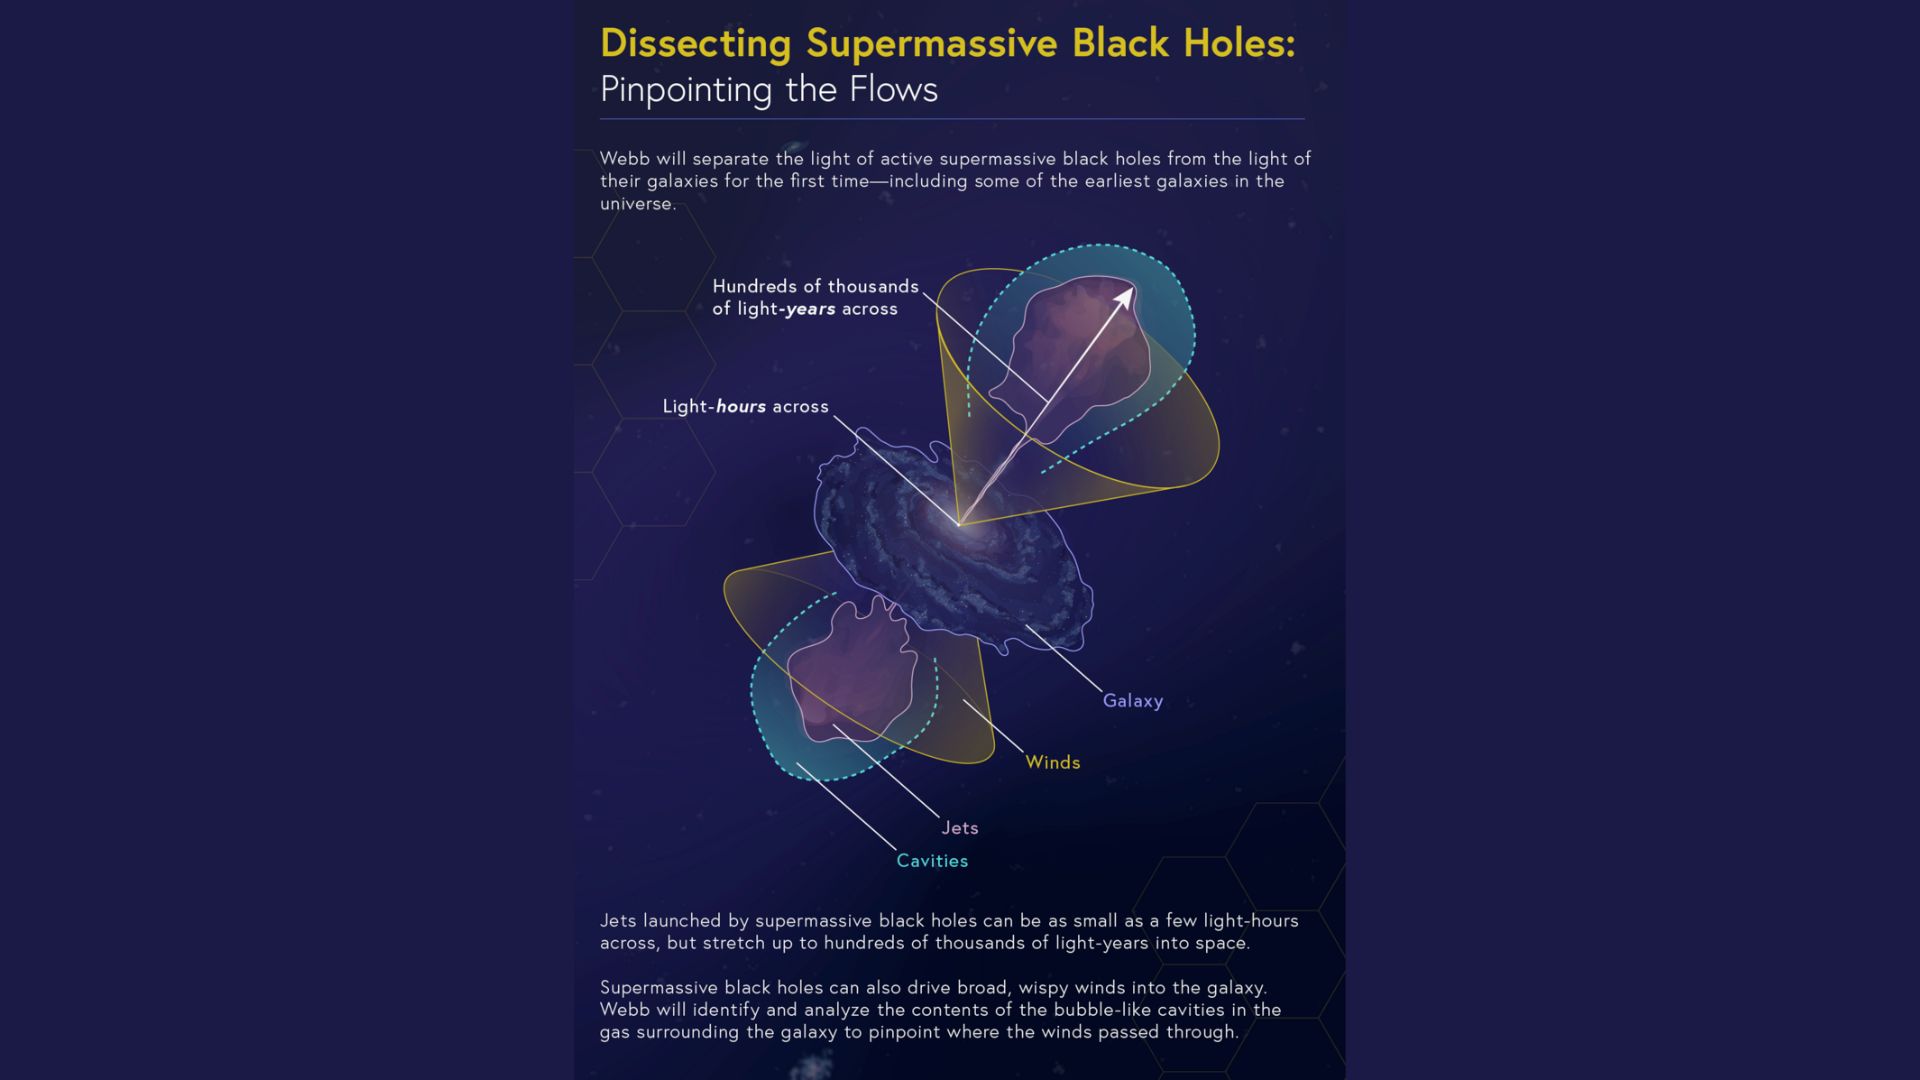 An infographic showing the various flows from a SMBH and its host galaxy. 